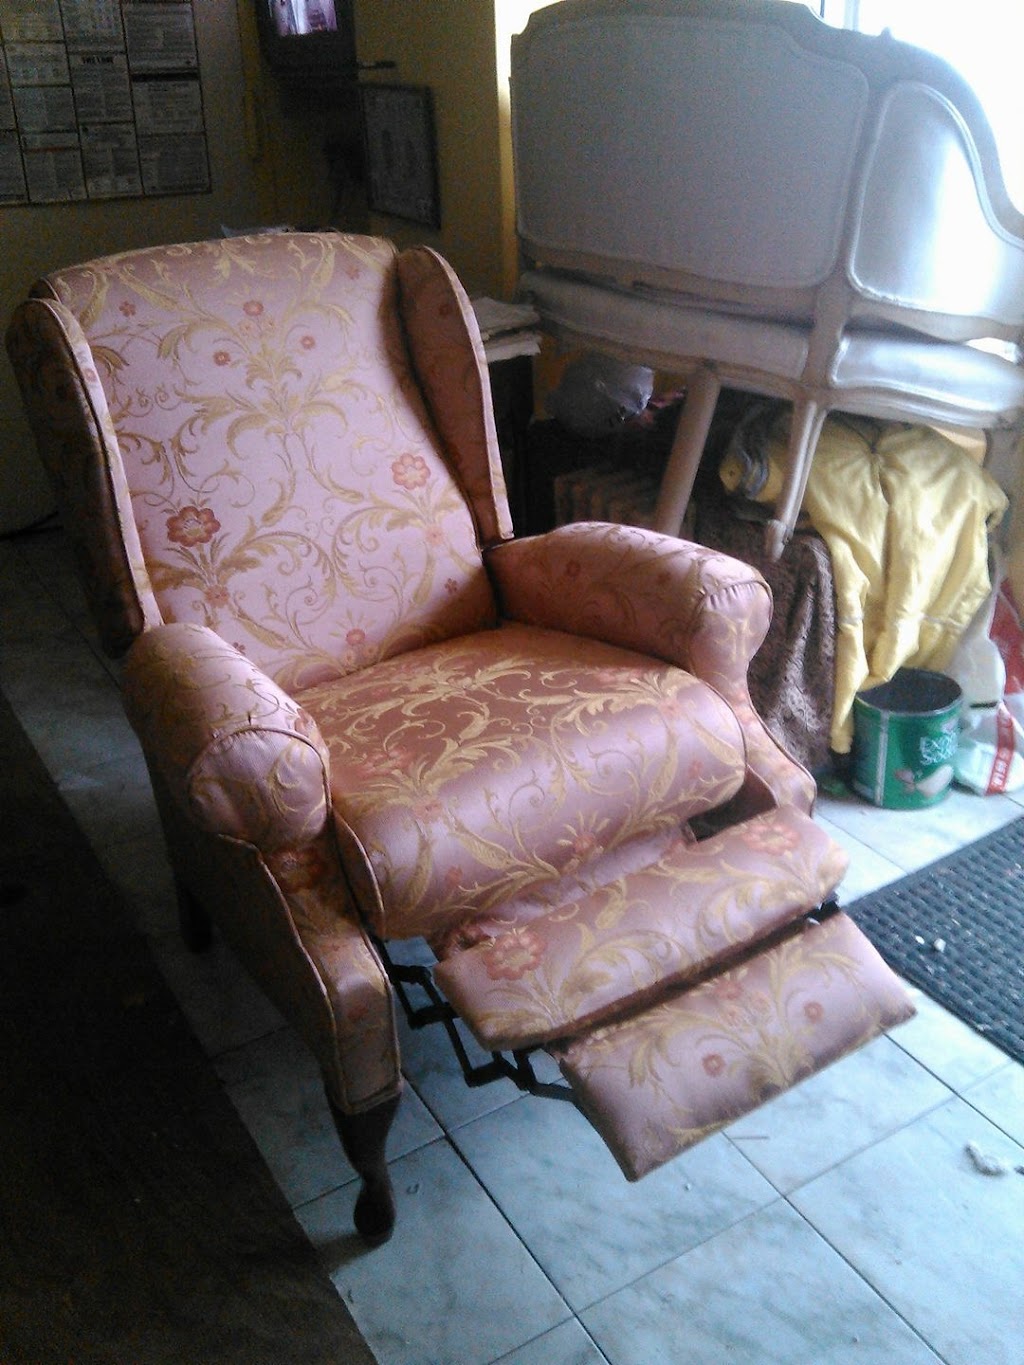 upholstery “Don Ponce”” | 475 Chestnut St, Brooklyn, NY 11208 | Phone: (718) 277-0026